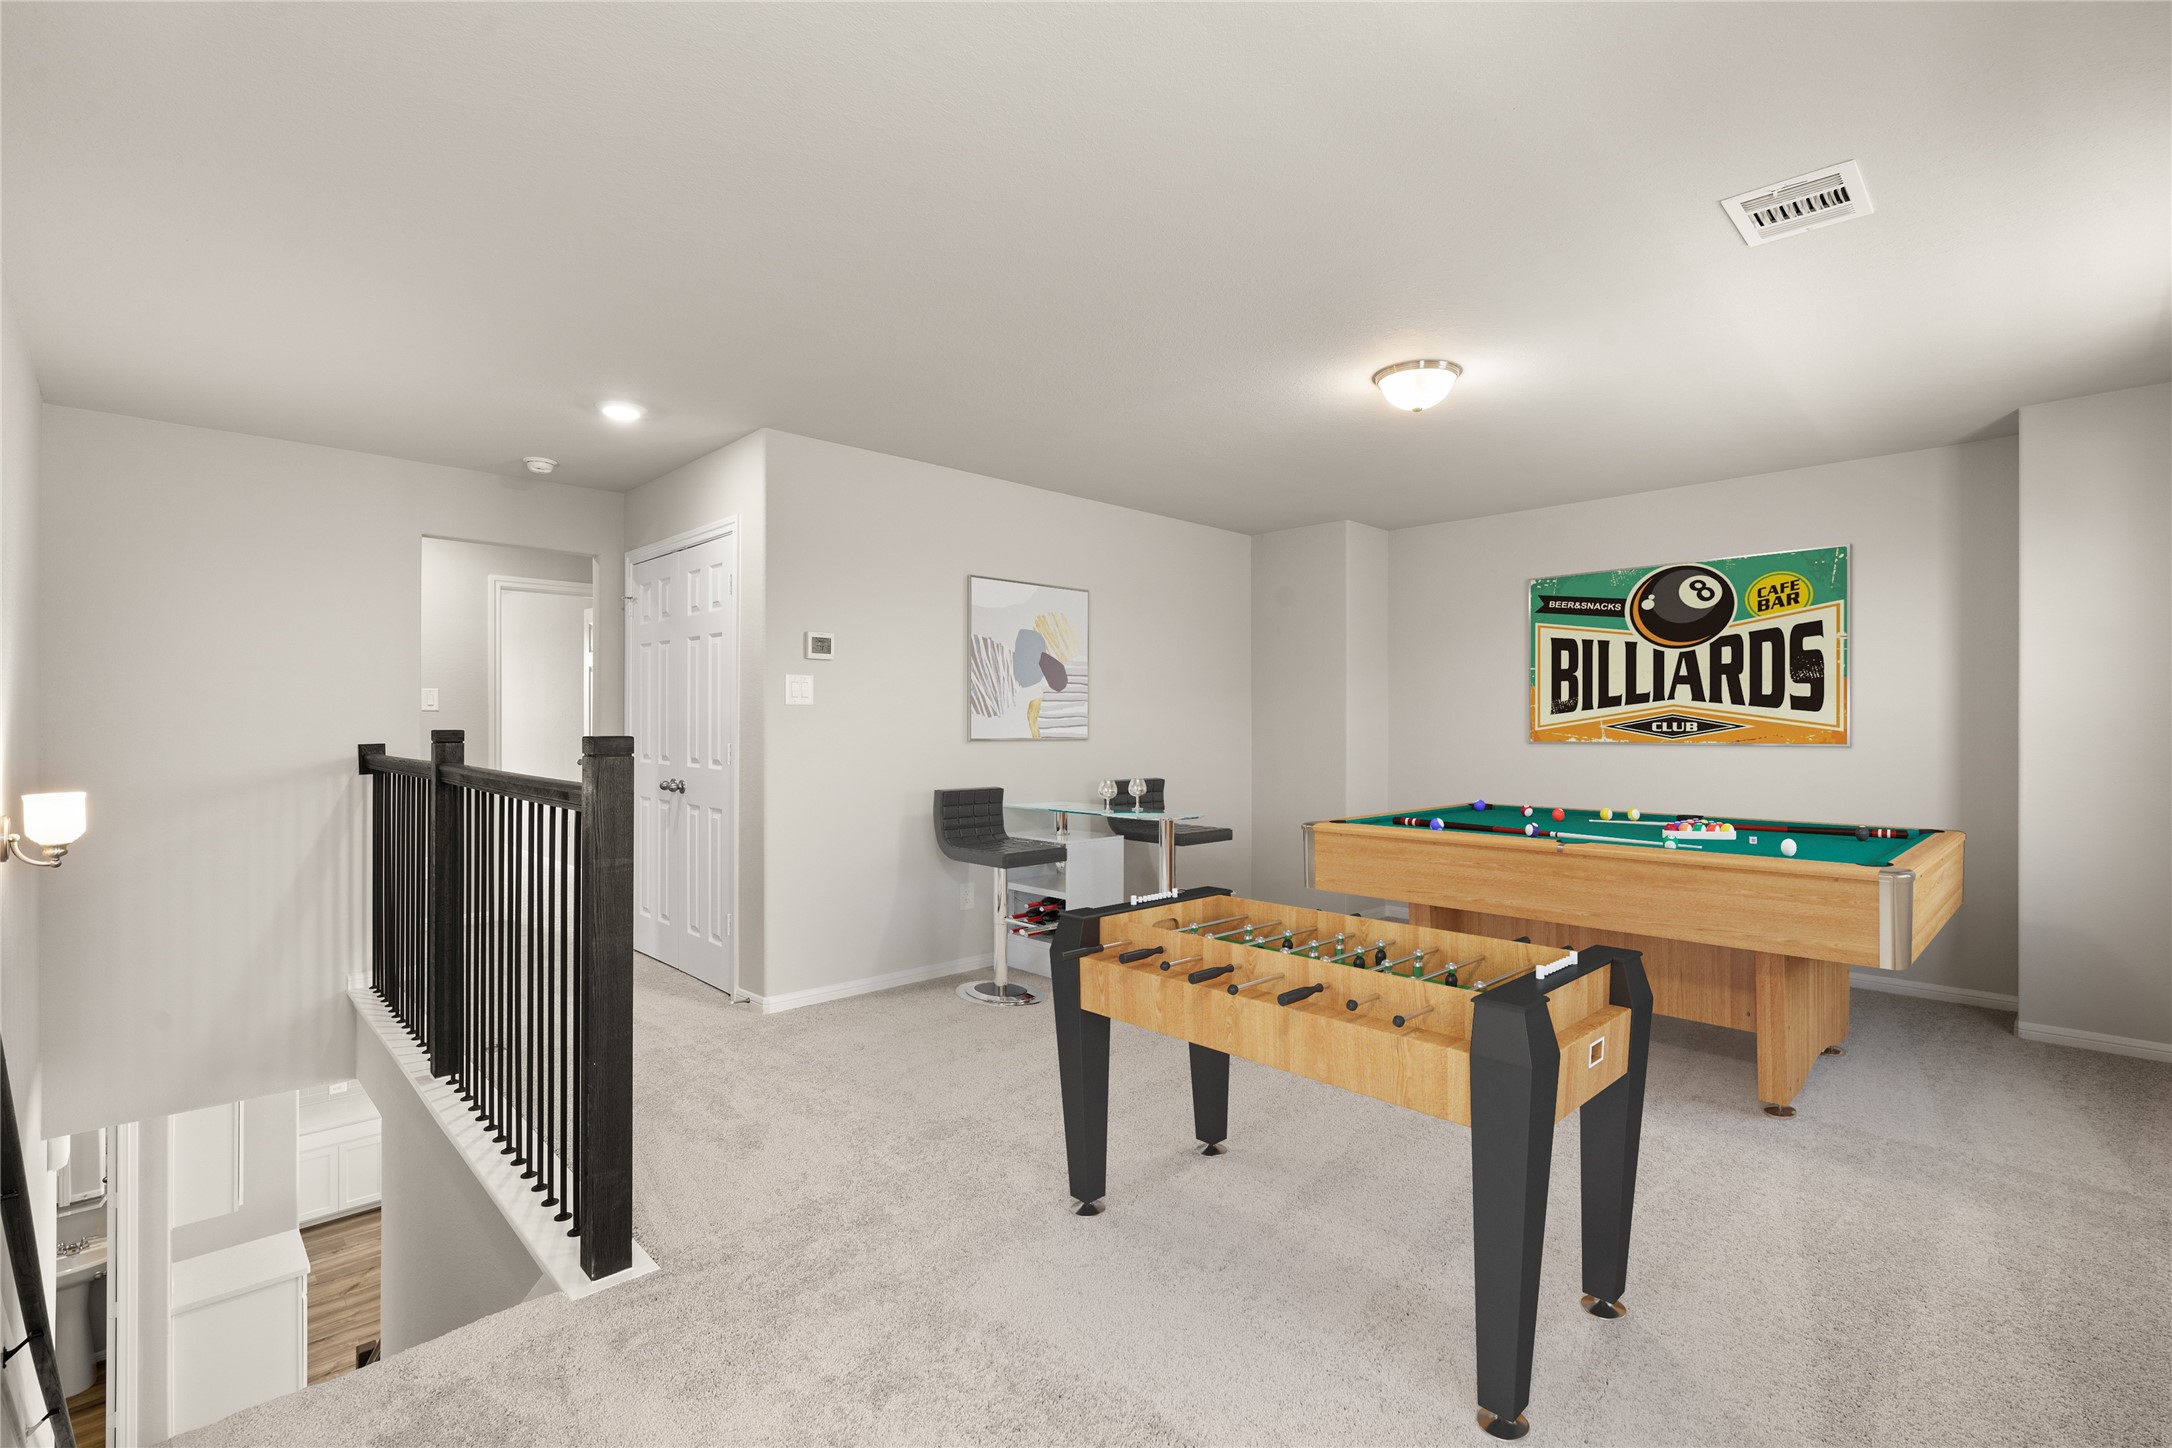 Come upstairs and enjoy a day of leisure in this fabulous game room! This is the perfect hangout spot or adult game room, this space features plush carpet, high ceiling, recessed lighting and custom paint.